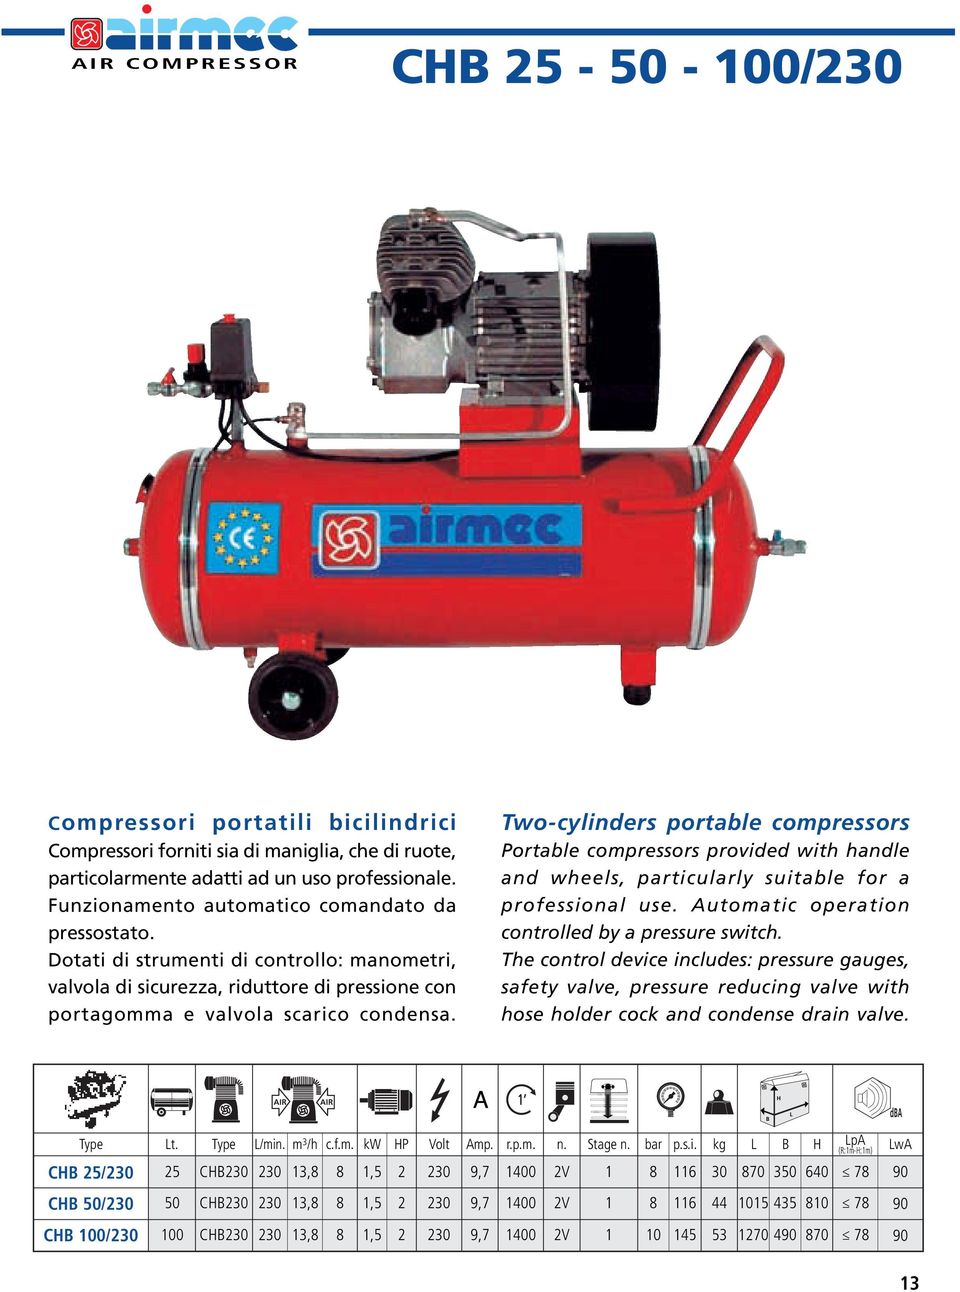 Two-cylinders portable compressors Portable compressors provided with handle and wheels, particularly suitable for a professional use. Automatic operation controlled by a pressure switch.